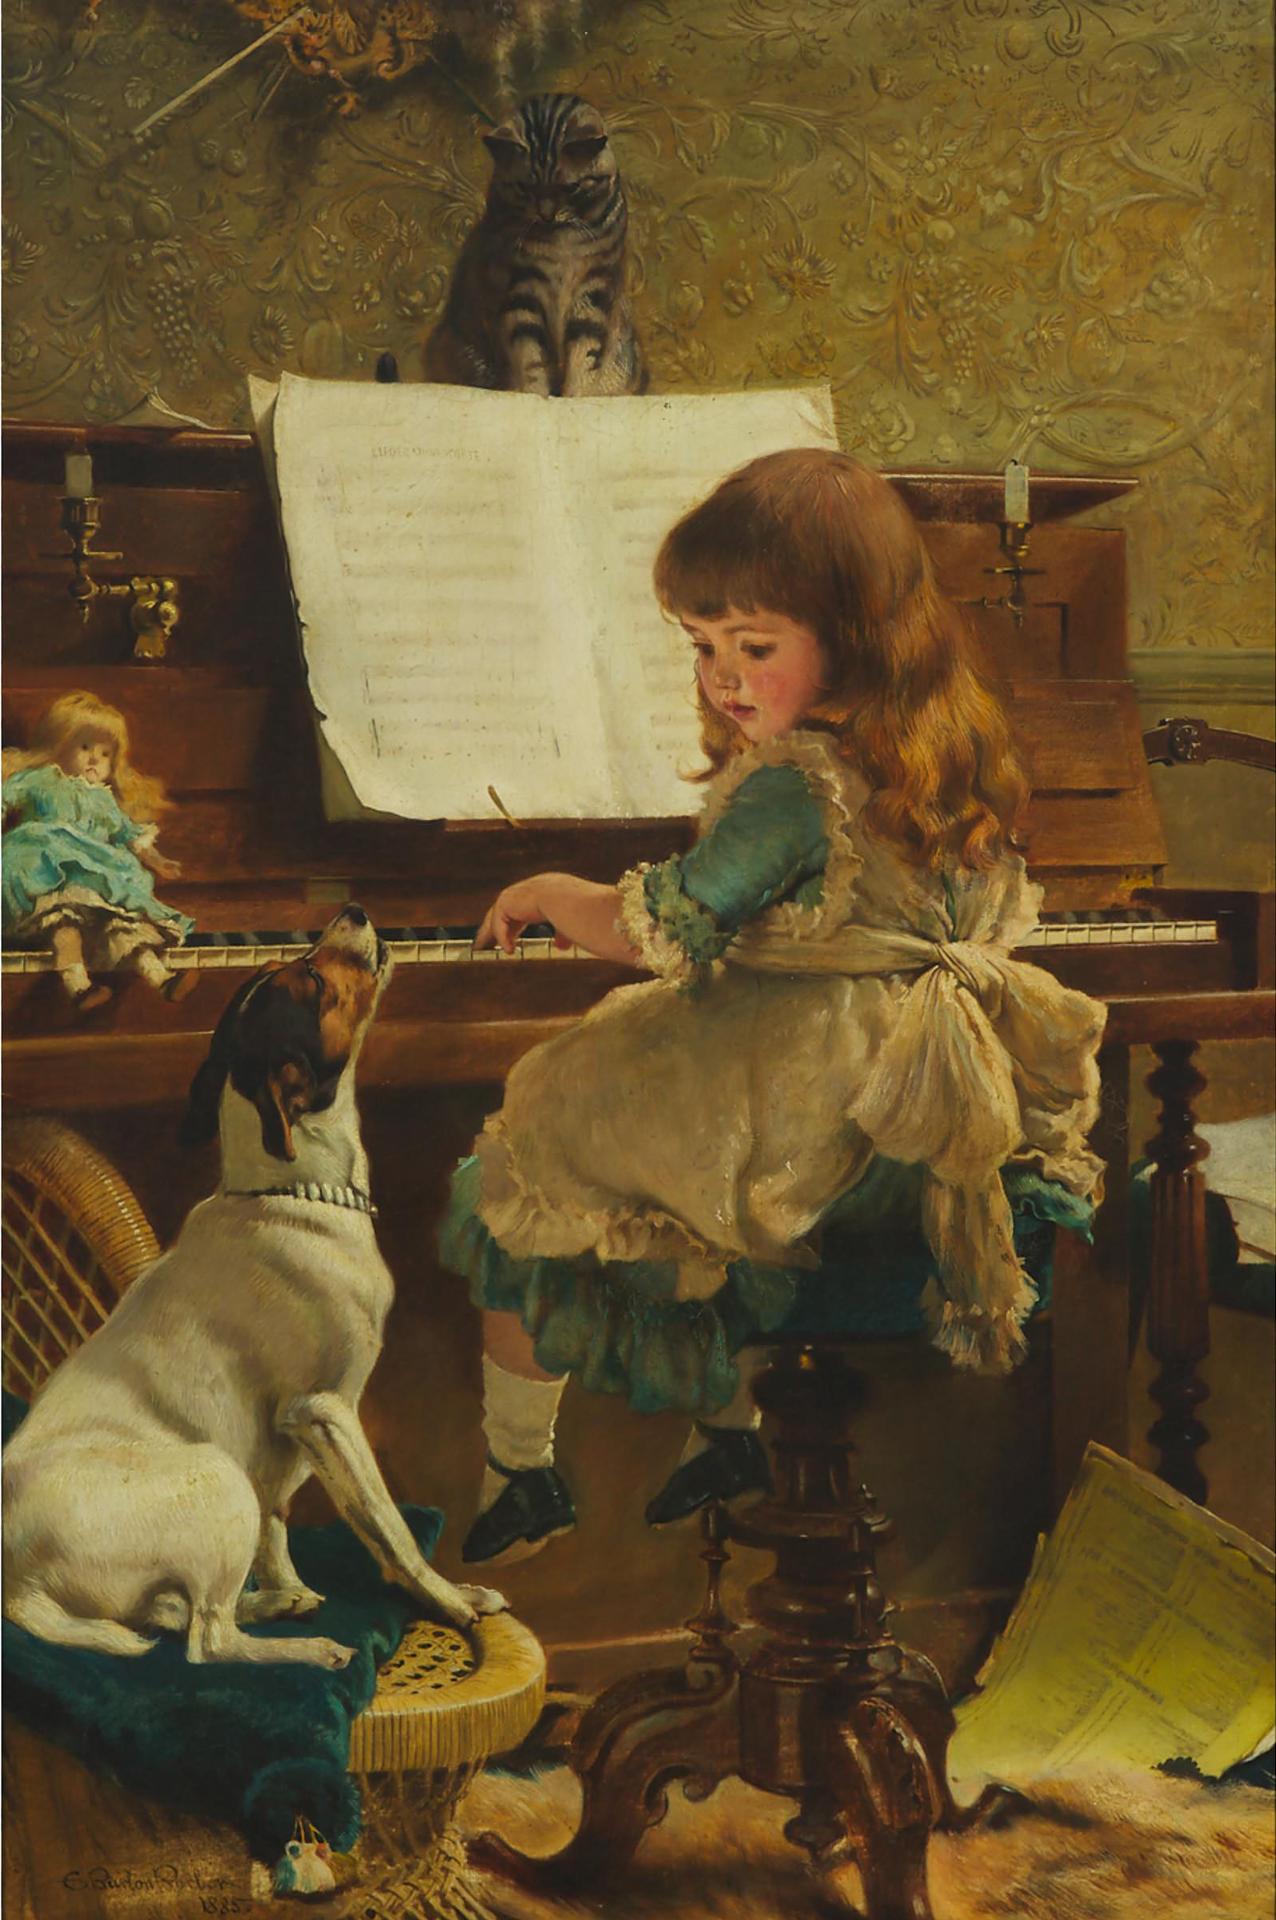 Charles Burton Barber (1845-1894) - Songs Without Words, 1885